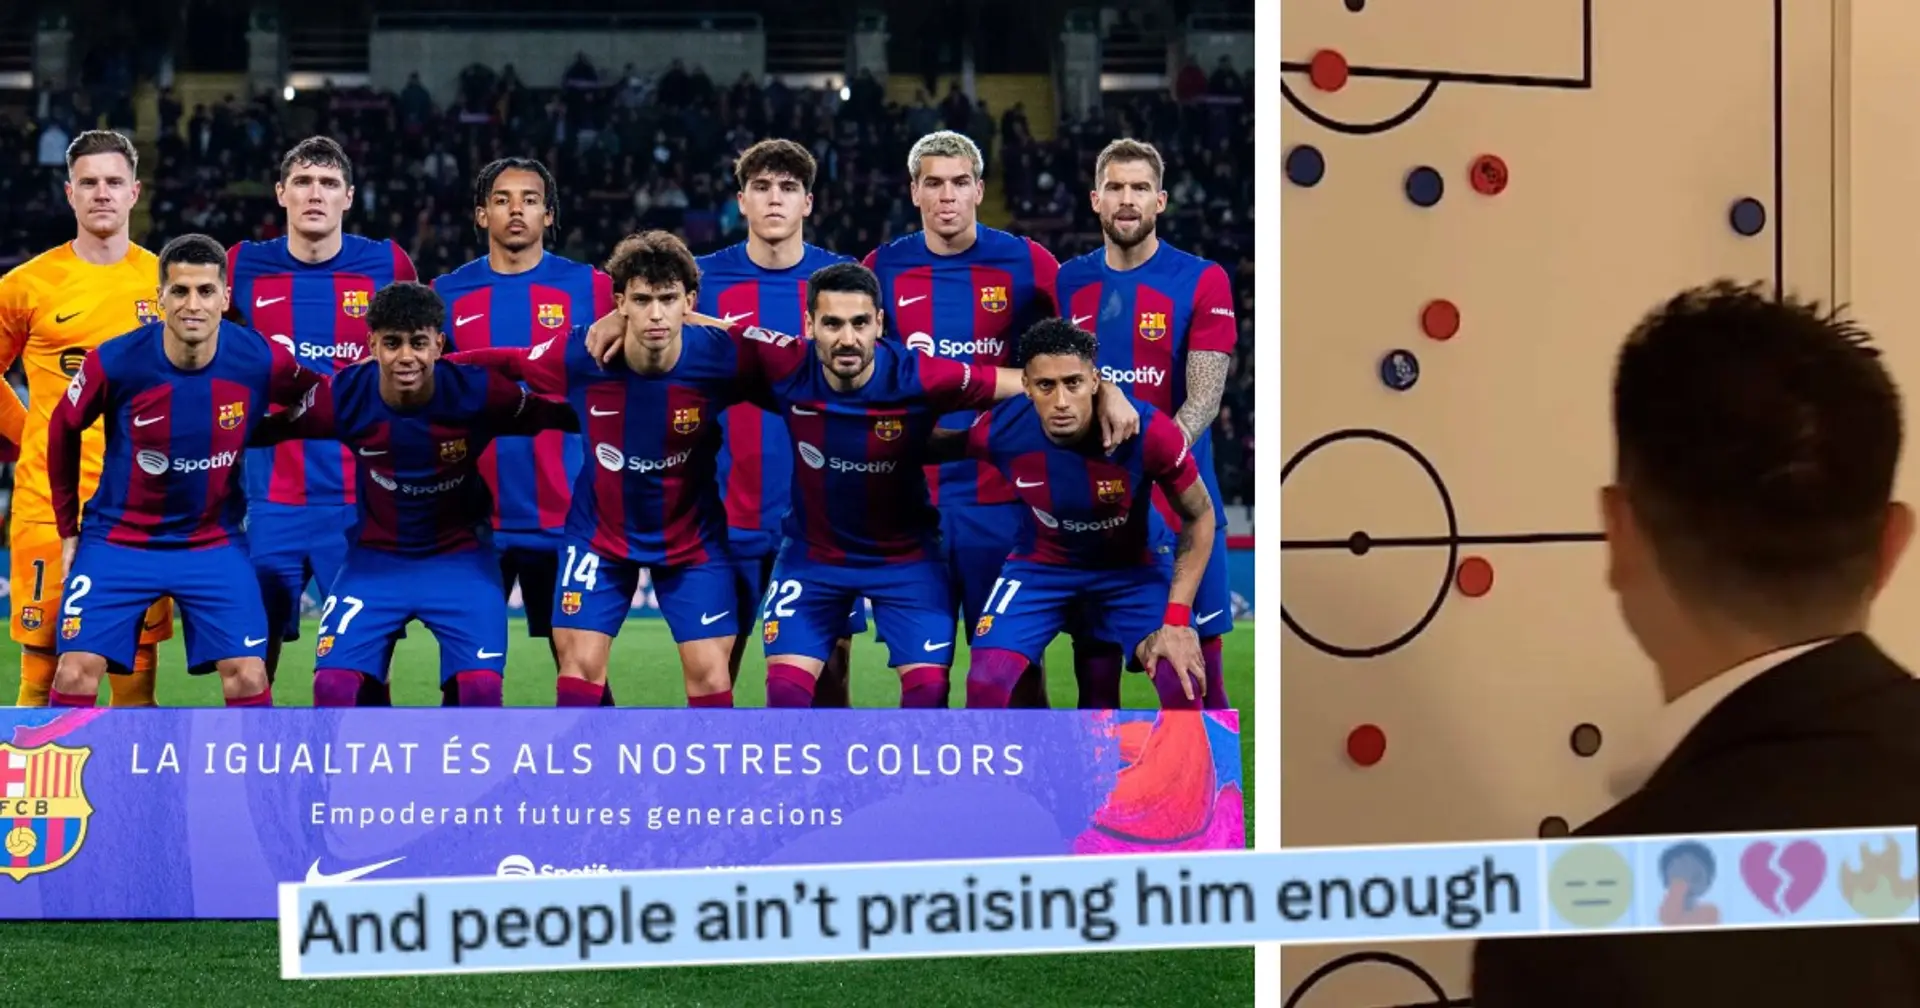 6 goals conceded in 7 games: Barca fans applaud tactical tweak that involves ONE player 